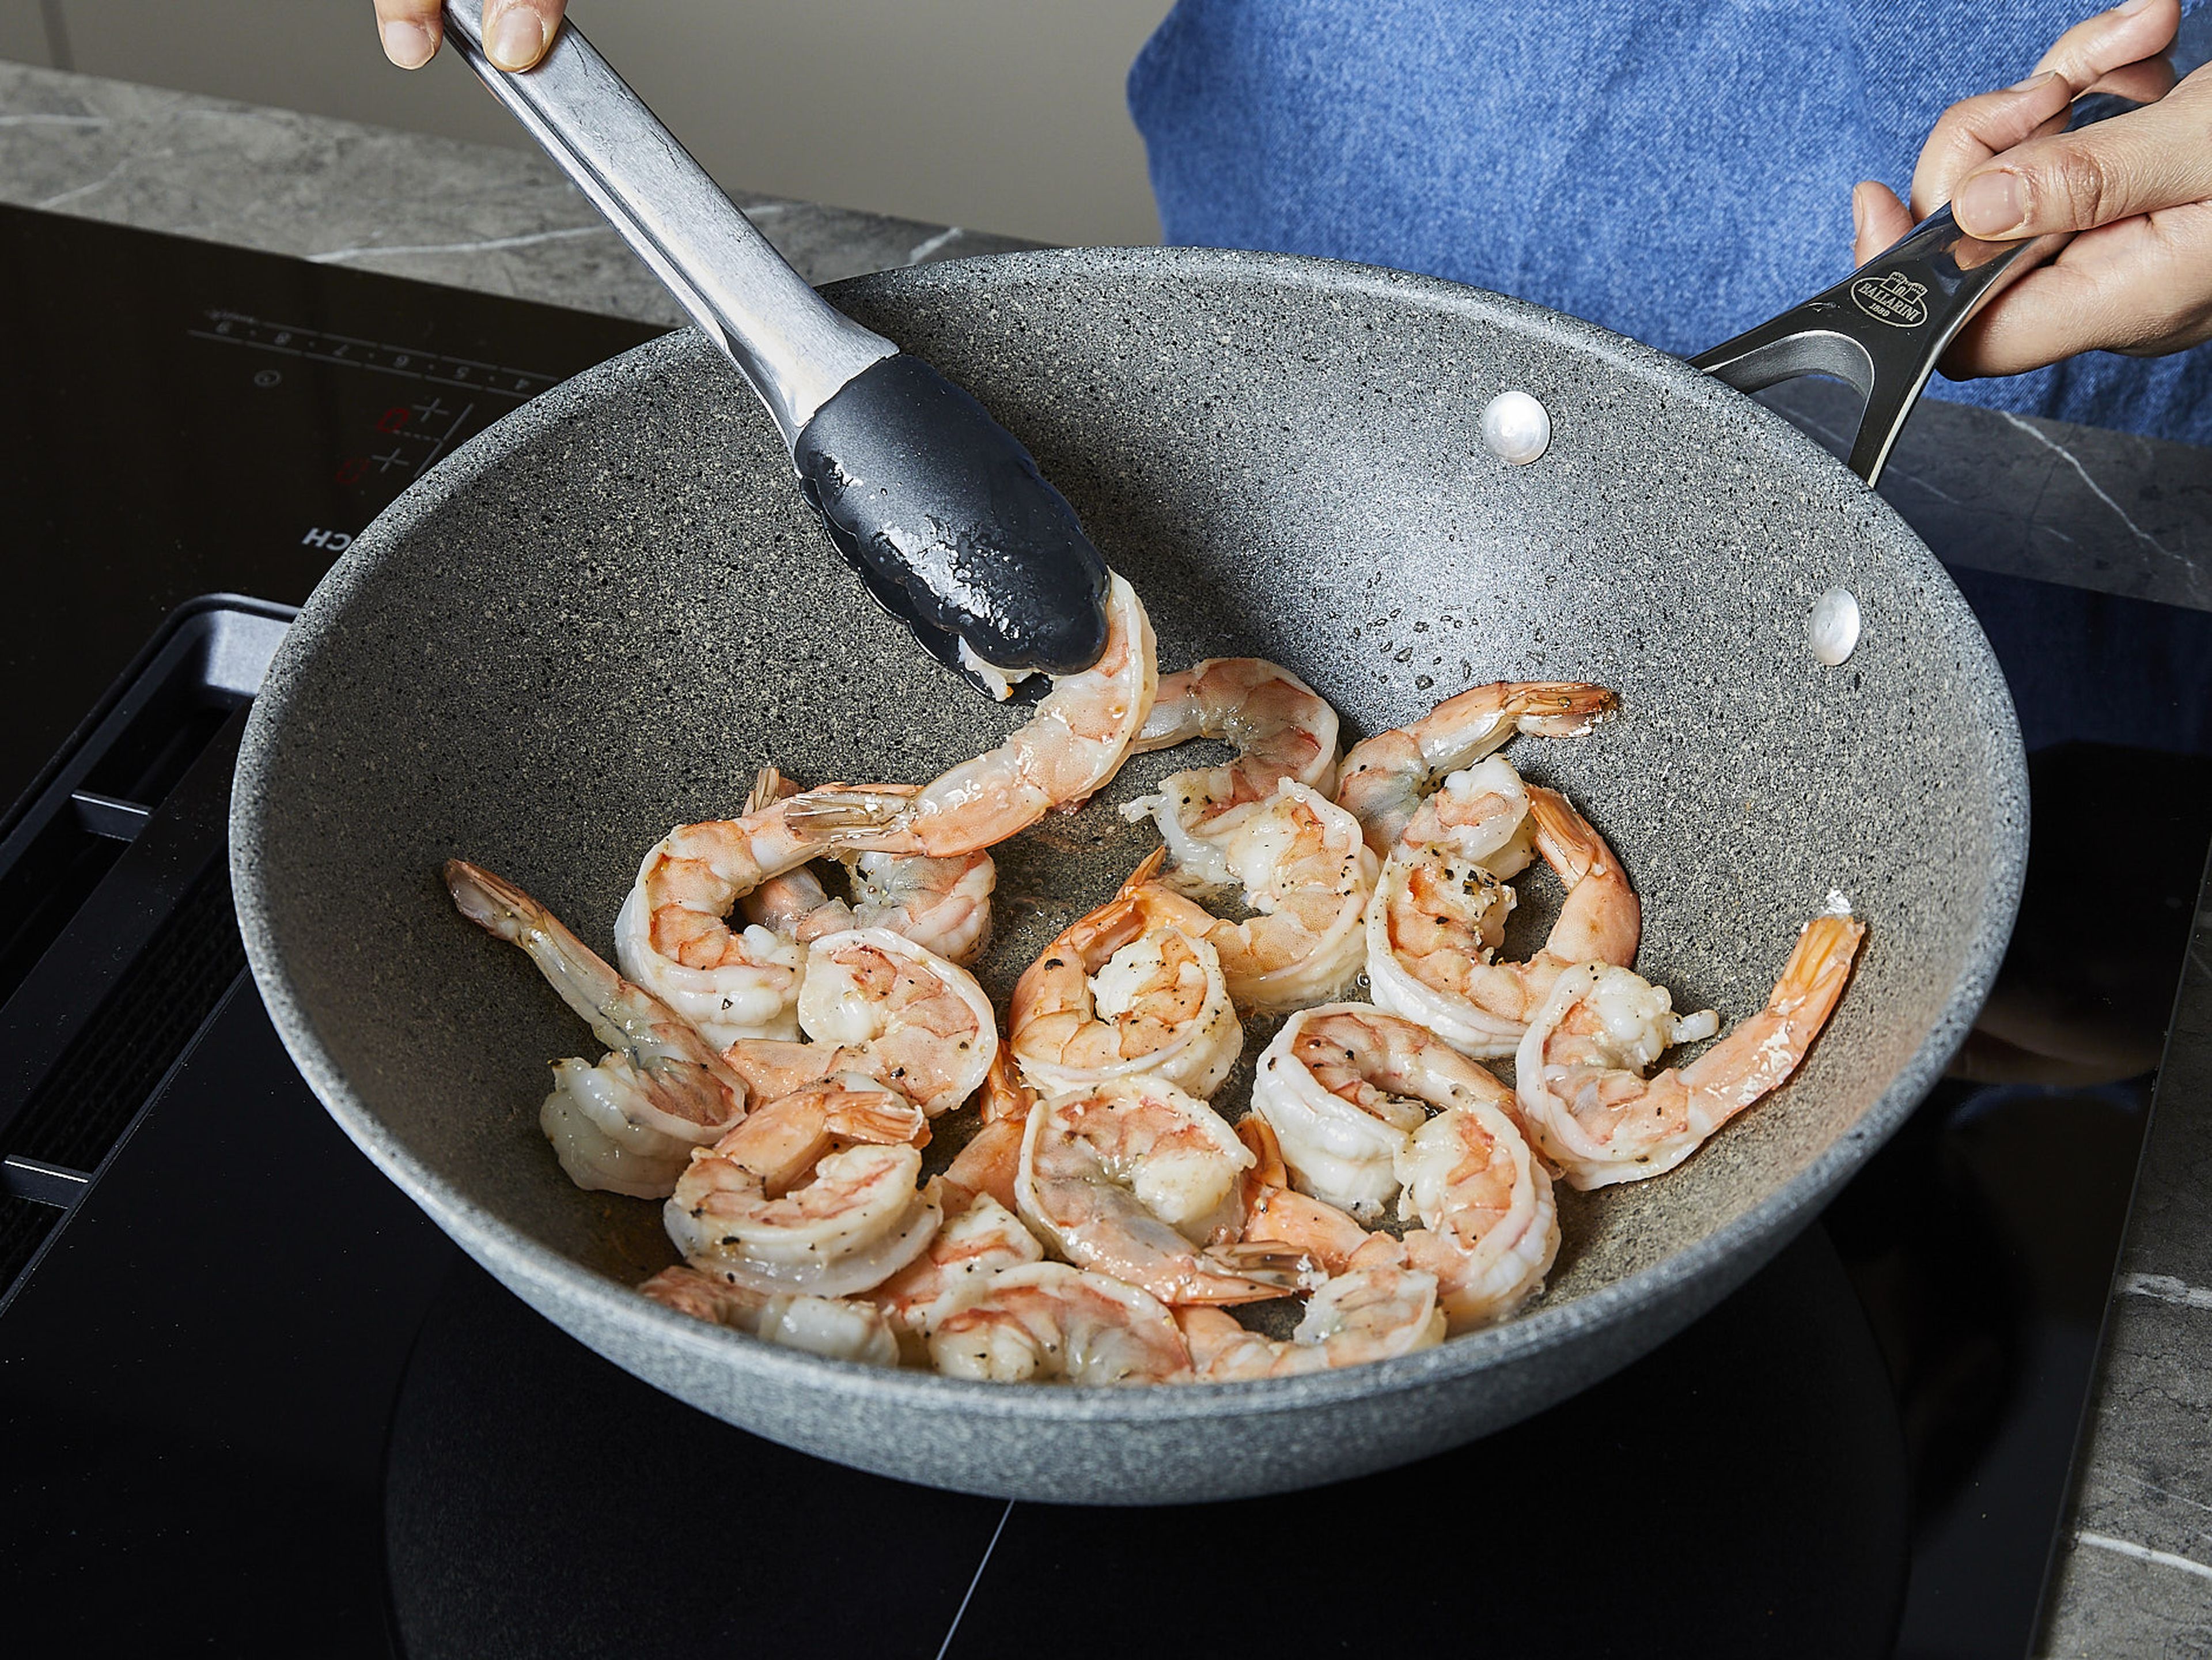 In a frying pan, heat oil over medium-high heat. Add shrimps and fry until they turn pink on both sides, approx. 1–2 min. per side. Remove from the pan and set aside. In the same pan, add more oil if needed, then add ginger, garlic, and chili flakes and fry until fragrant. Then add asparagus and fry for approx. 2 min.